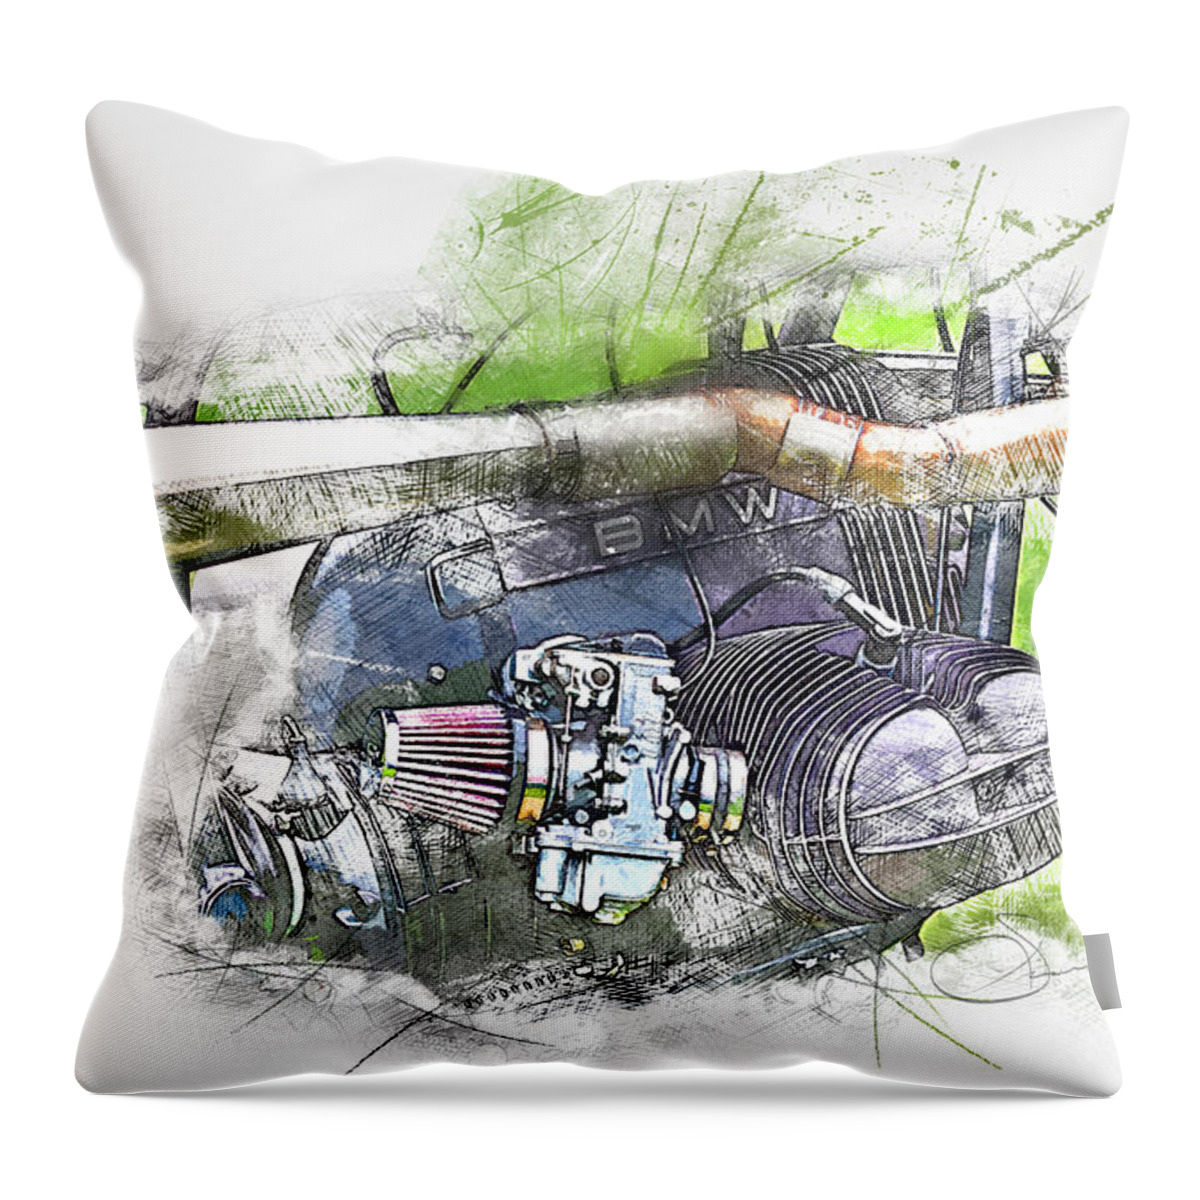 Motorcycle Throw Pillow featuring the digital art BMW Cycle by Rob Smith's